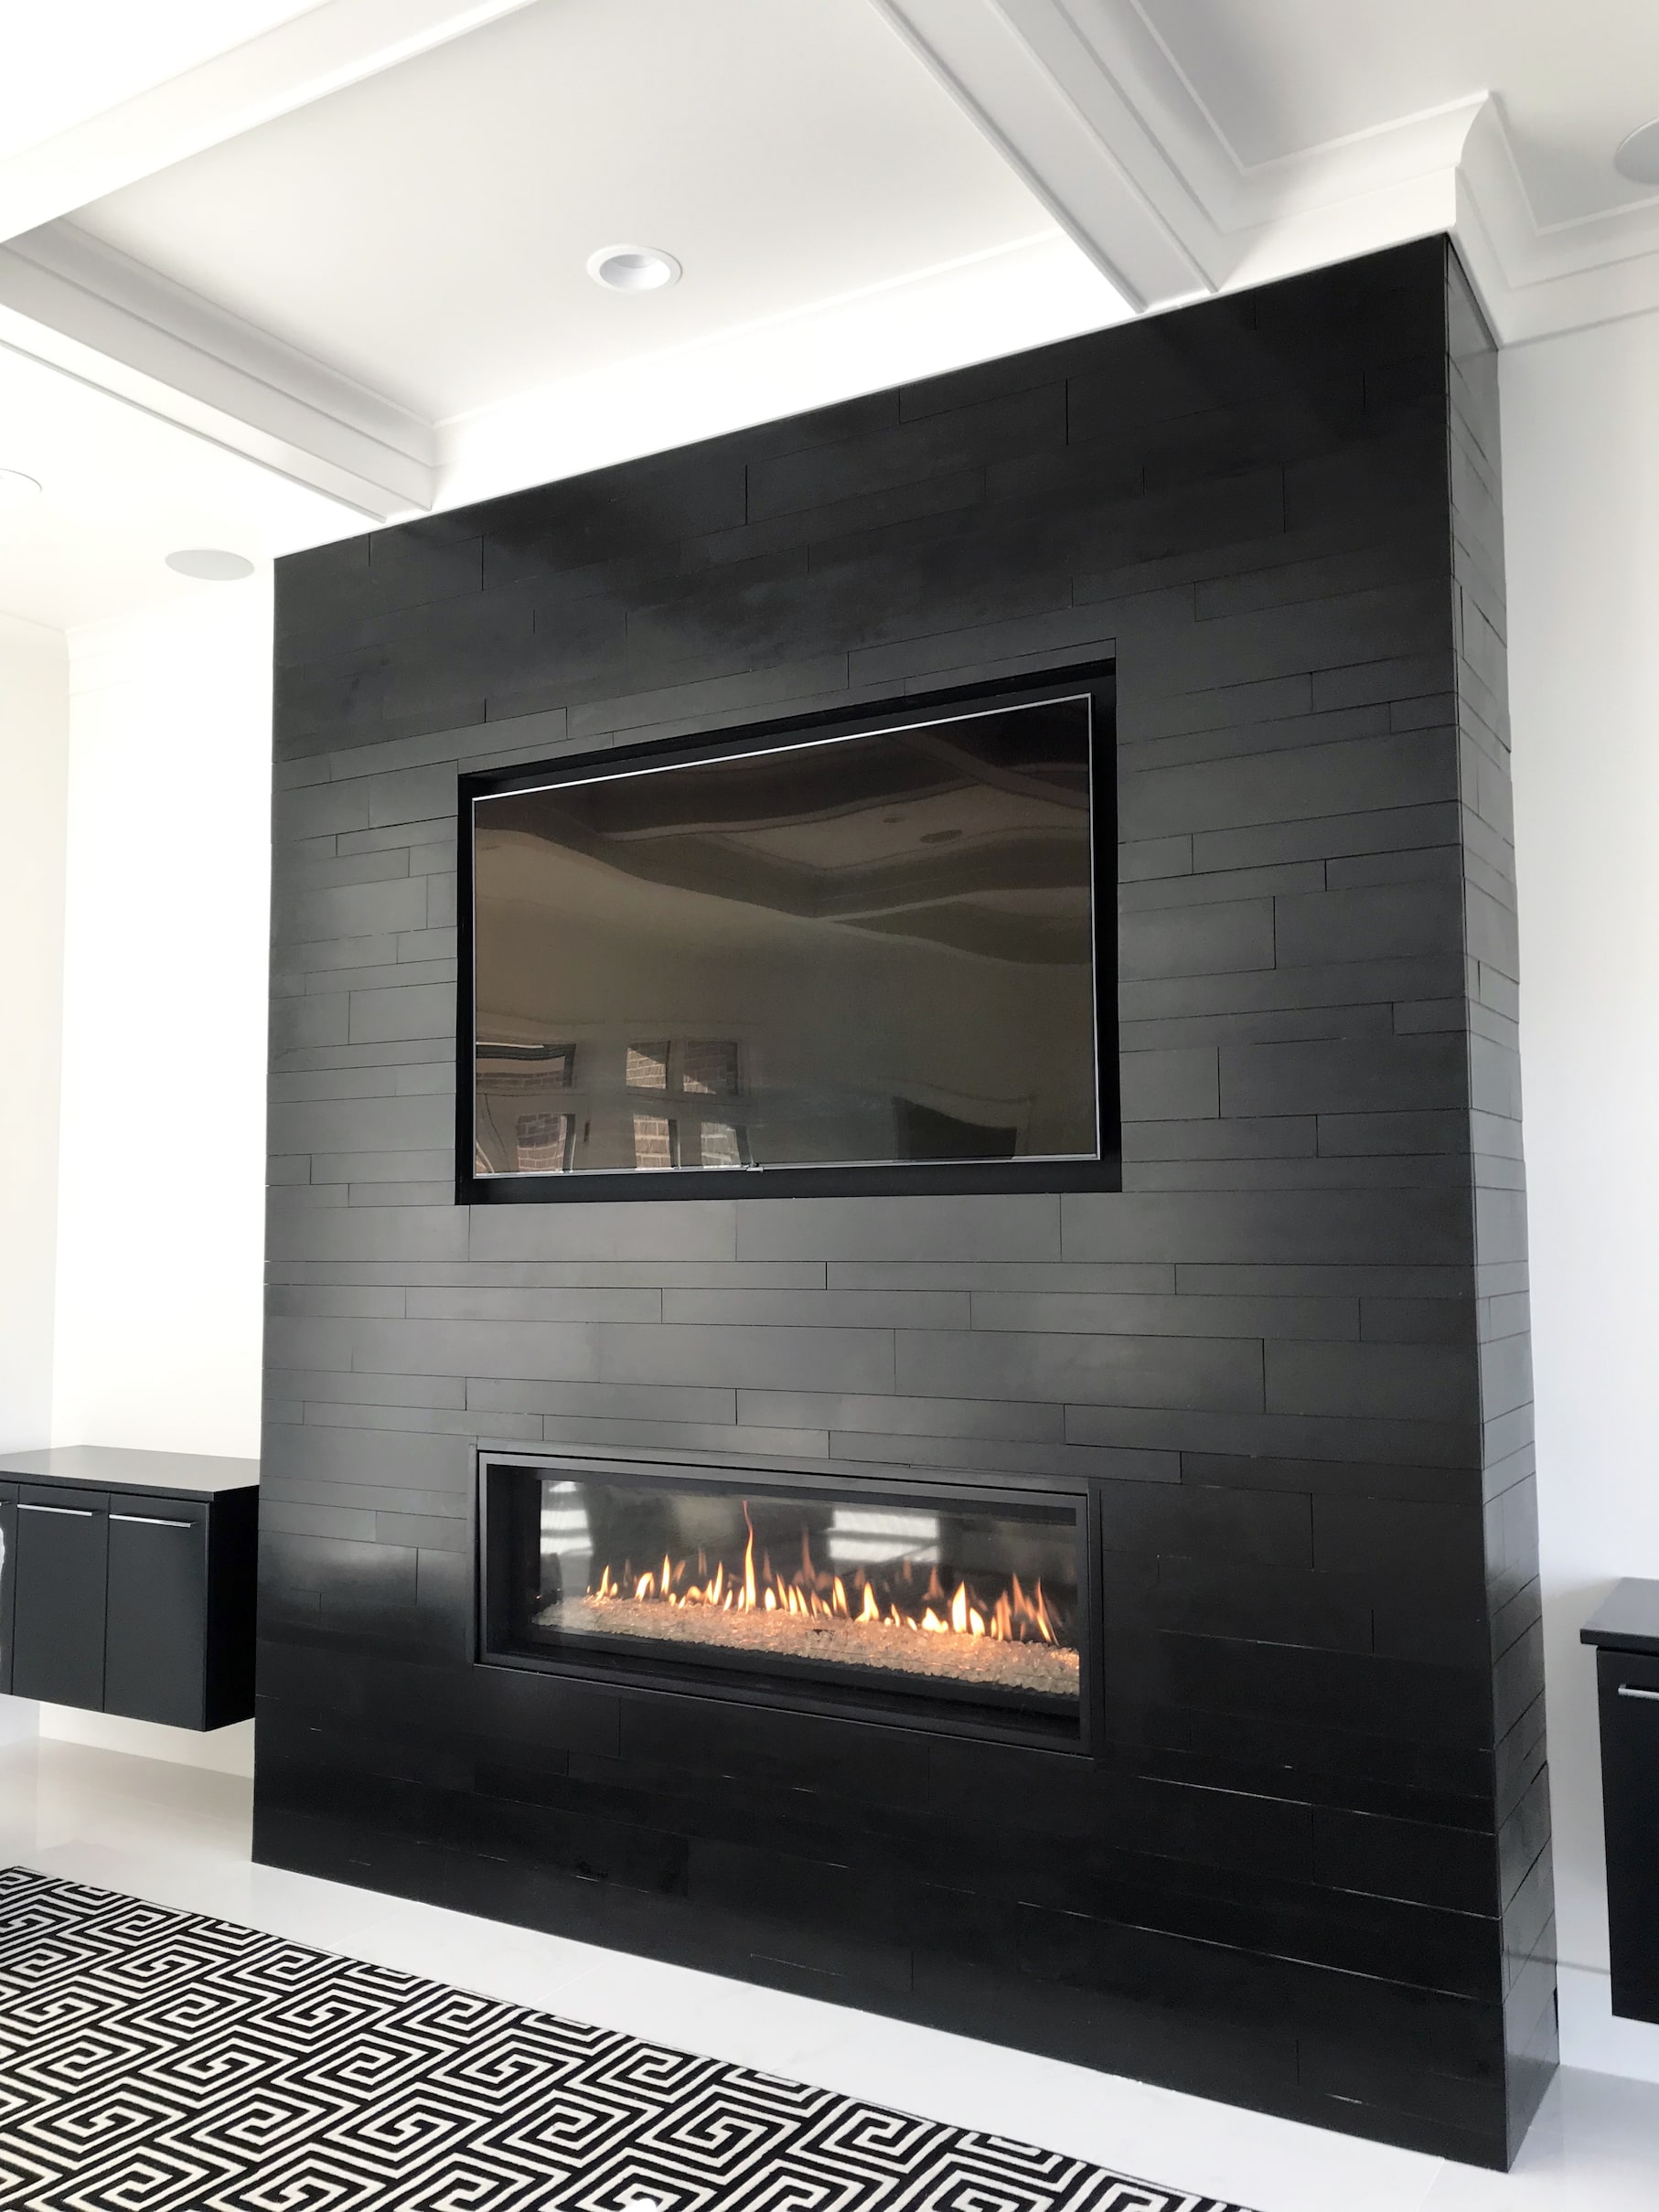 Norstone Planc Large Format Tiles in Ebony installed on a modern fireplace with outside corners